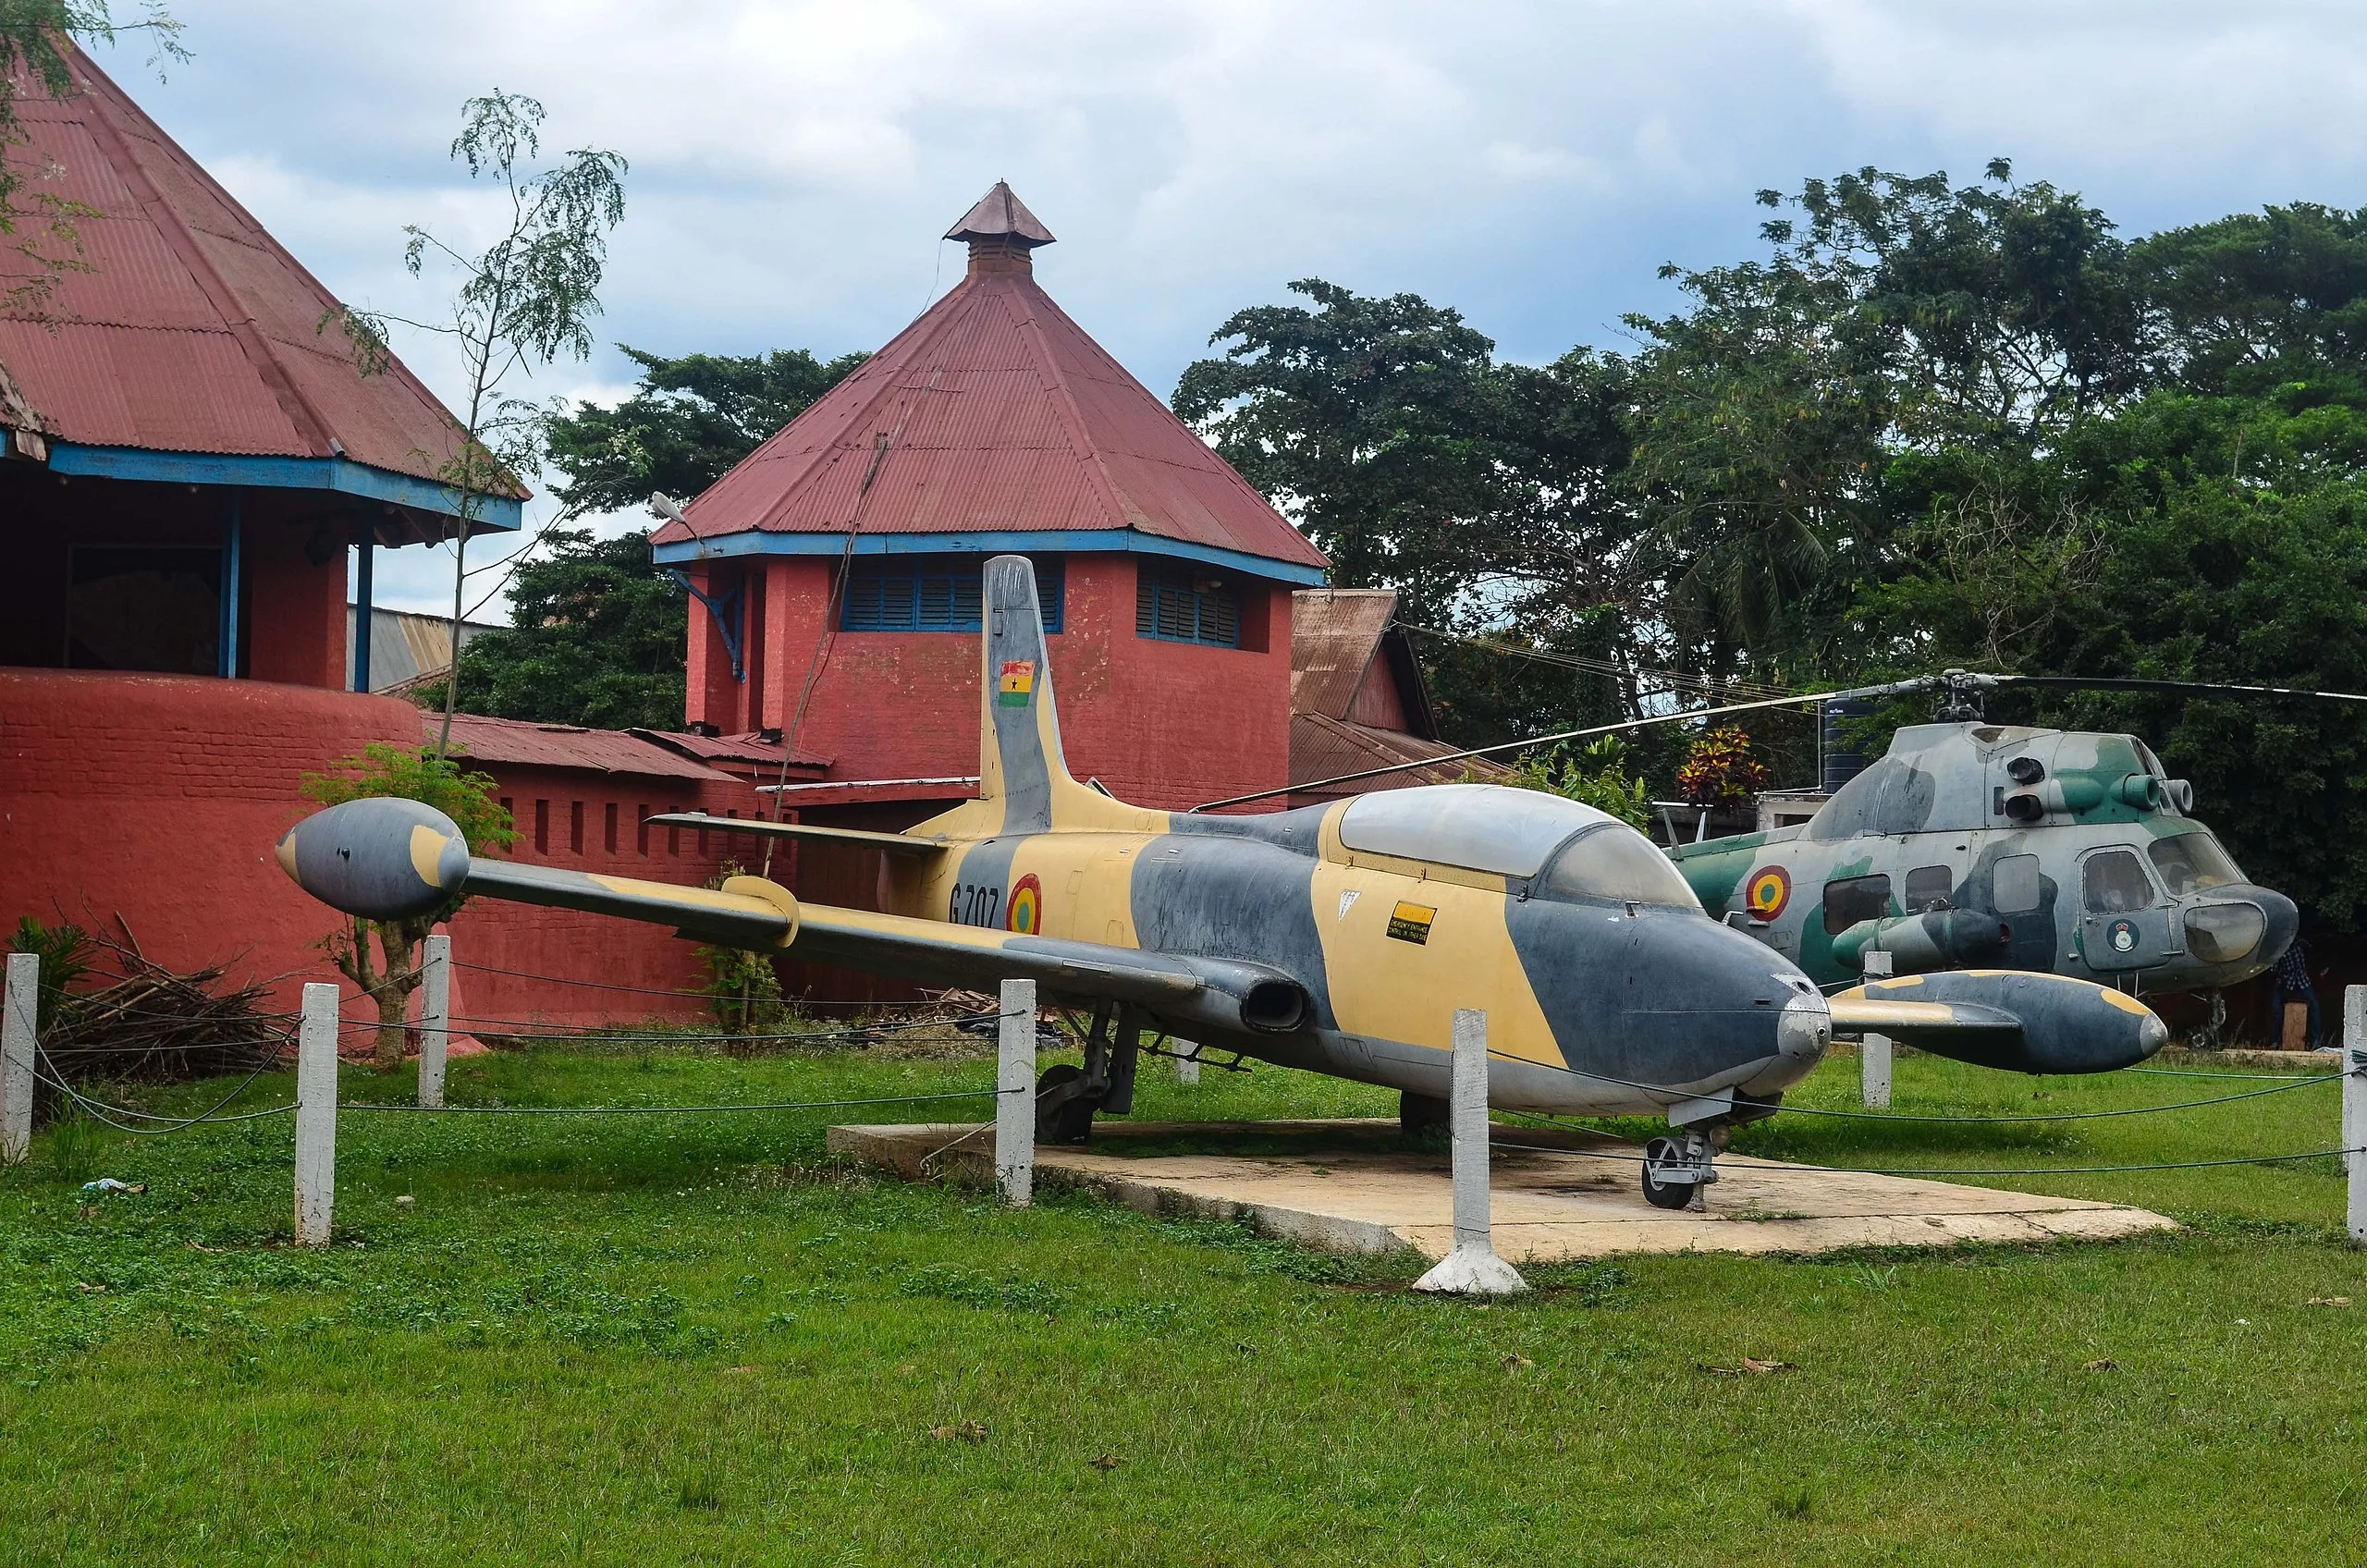 Armed Forces Museum in Ghana, Africa | Museums - Rated 3.3